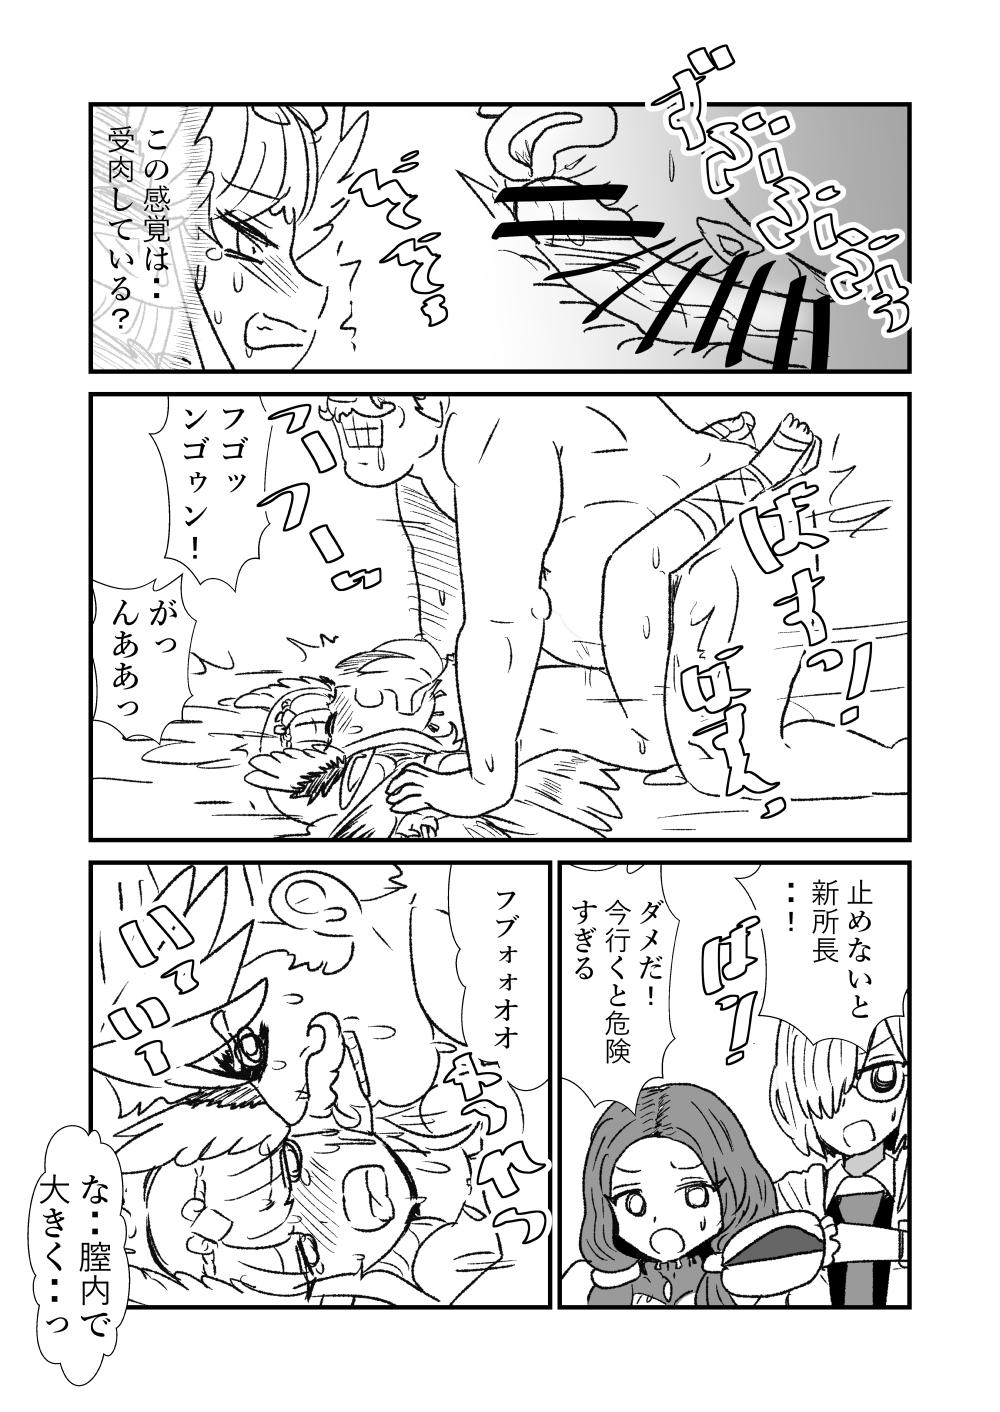 Orgia FPO~桃色林檎の種付け周回～ - Fate grand order Gangbang - Page 6